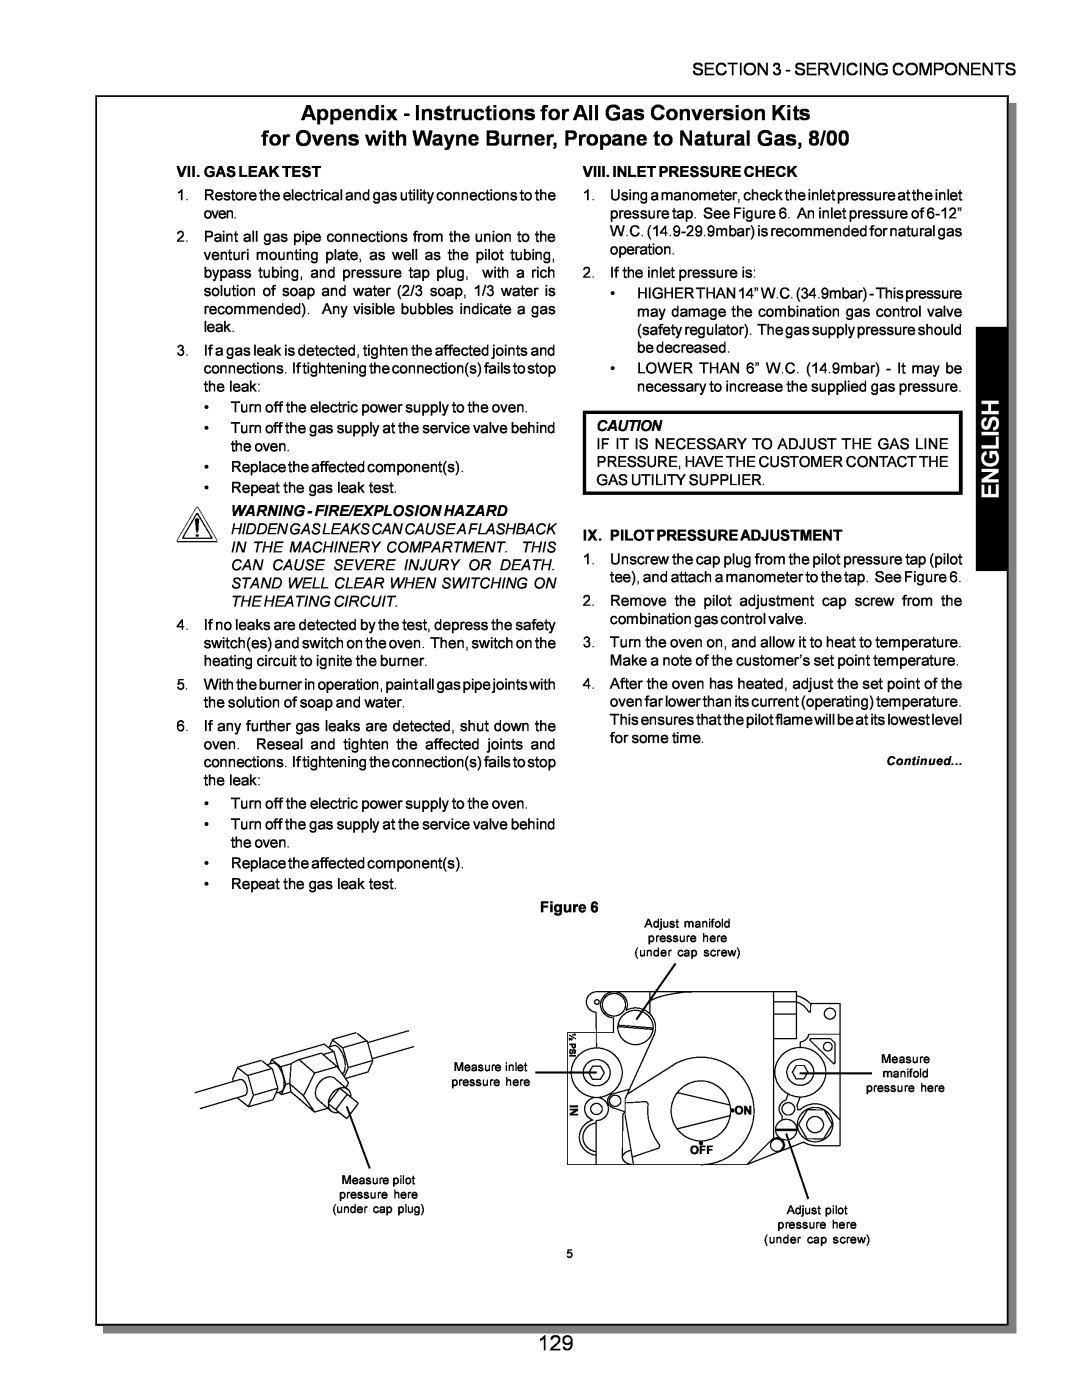 Middleby Marshall PS220, PS570, PS360 manual English, Appendix - Instructions for All Gas Conversion Kits, Vii. Gas Leak Test 